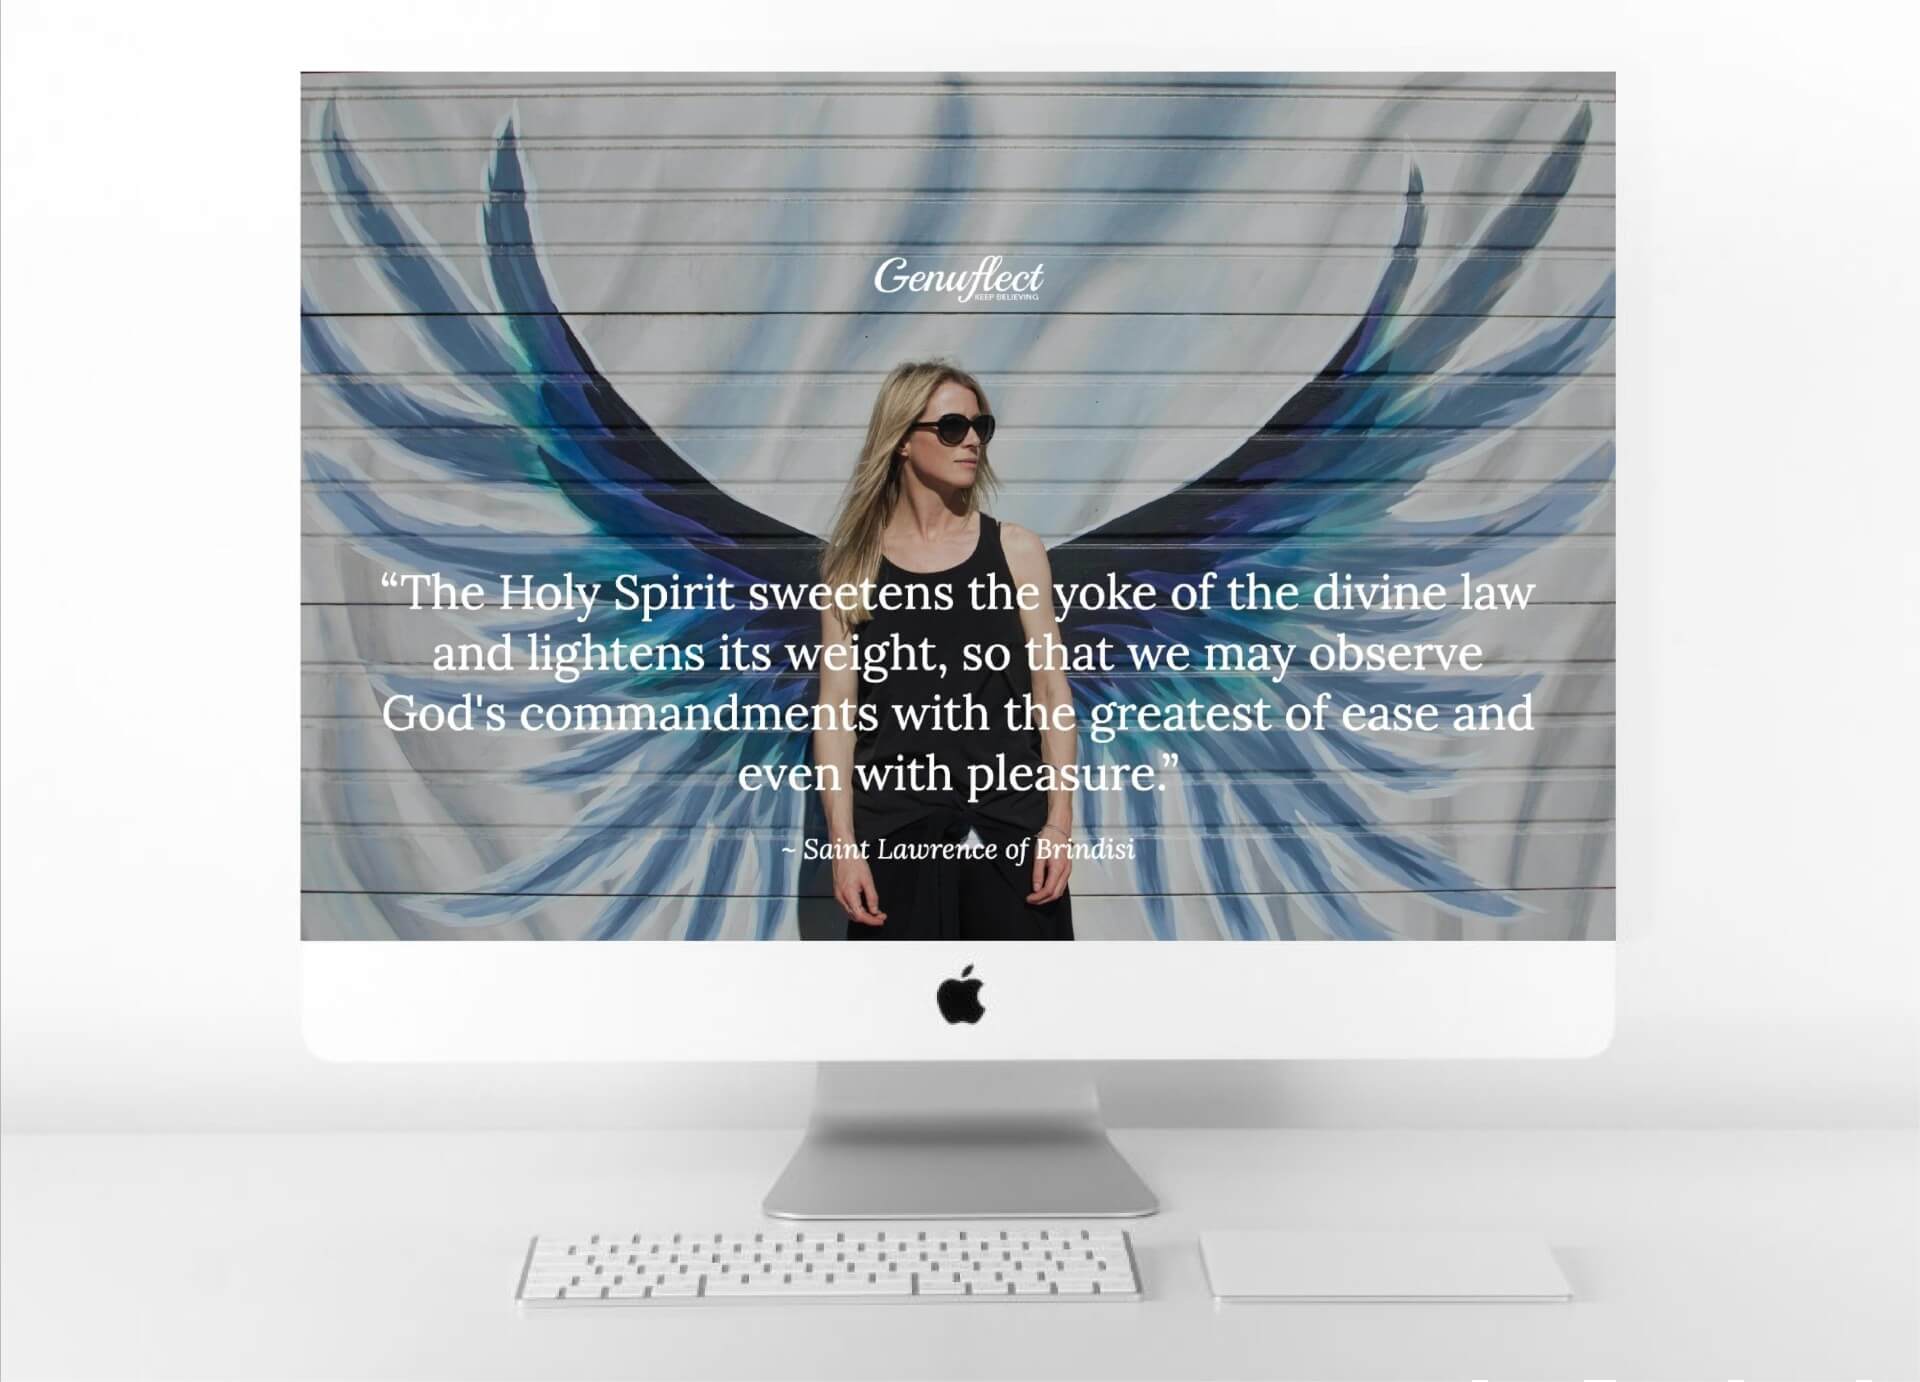 Genuflect computer desktop image of a Woman standing in front of a wall with angel wings painted on it